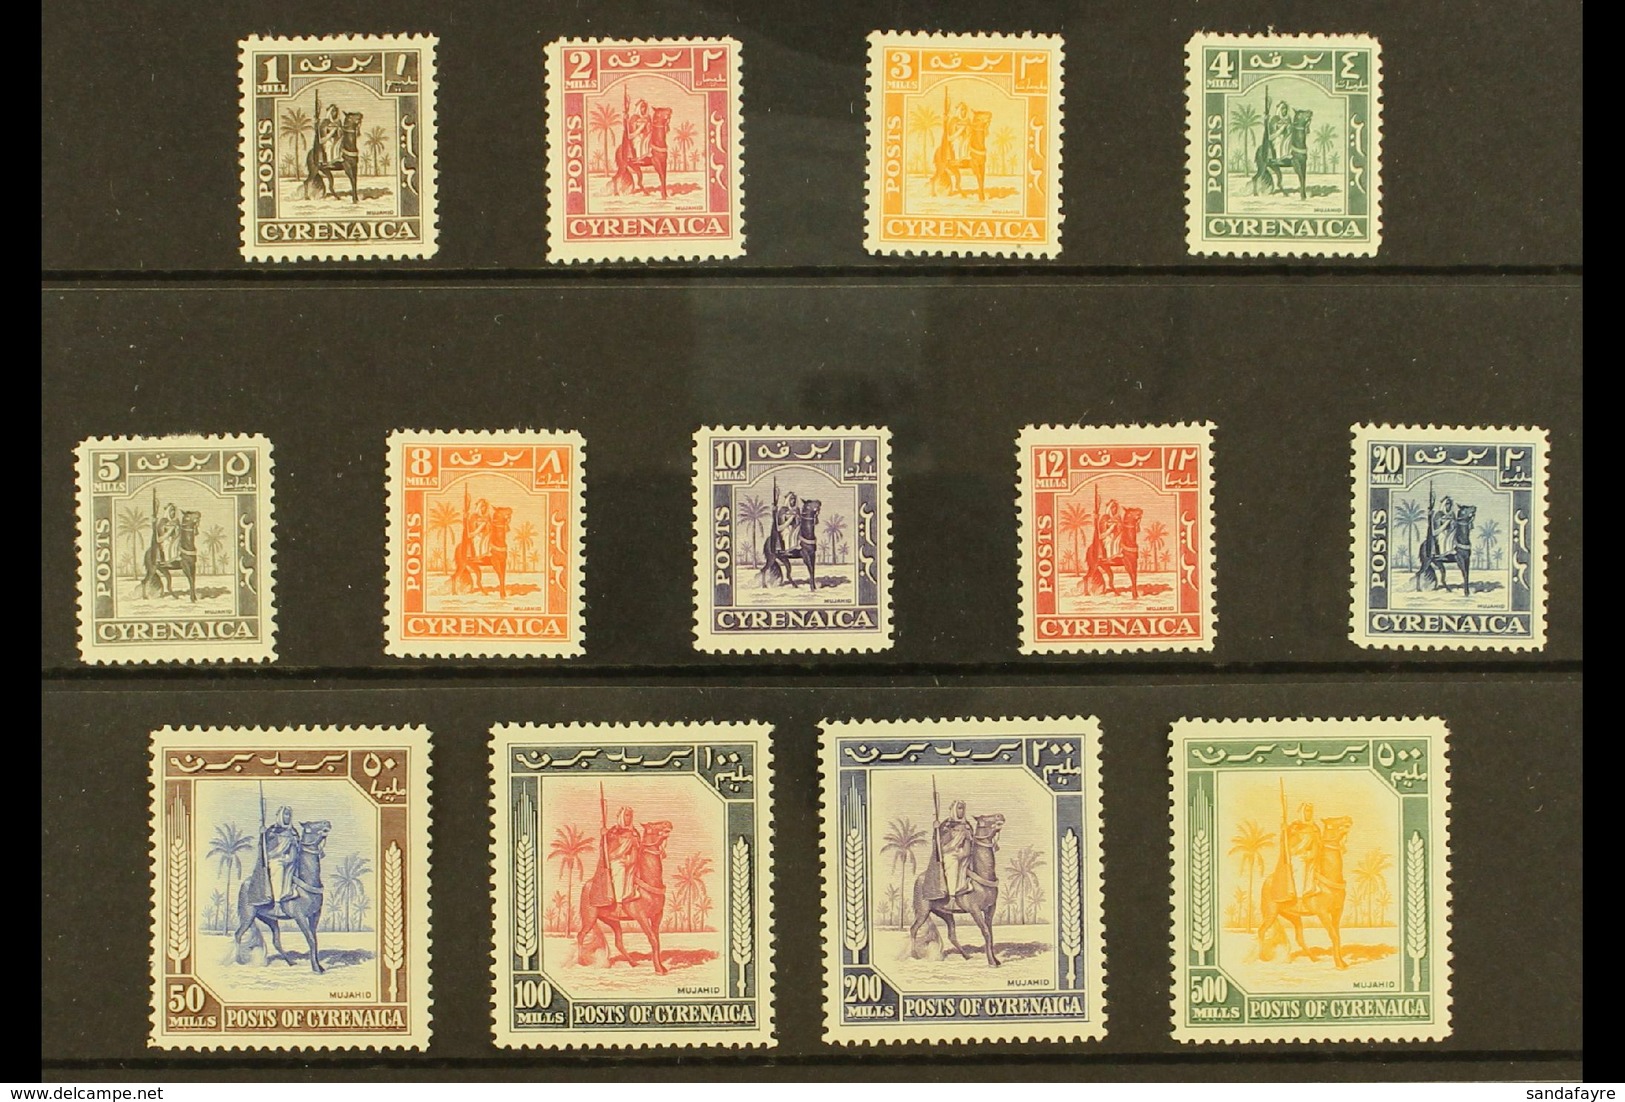 CYRENAICA 1950 "Mounted Warrior" Complete Definitive Set, SG 136/148, Very Fine Mint. (13 Stamps) For More Images, Pleas - Africa Orientale Italiana